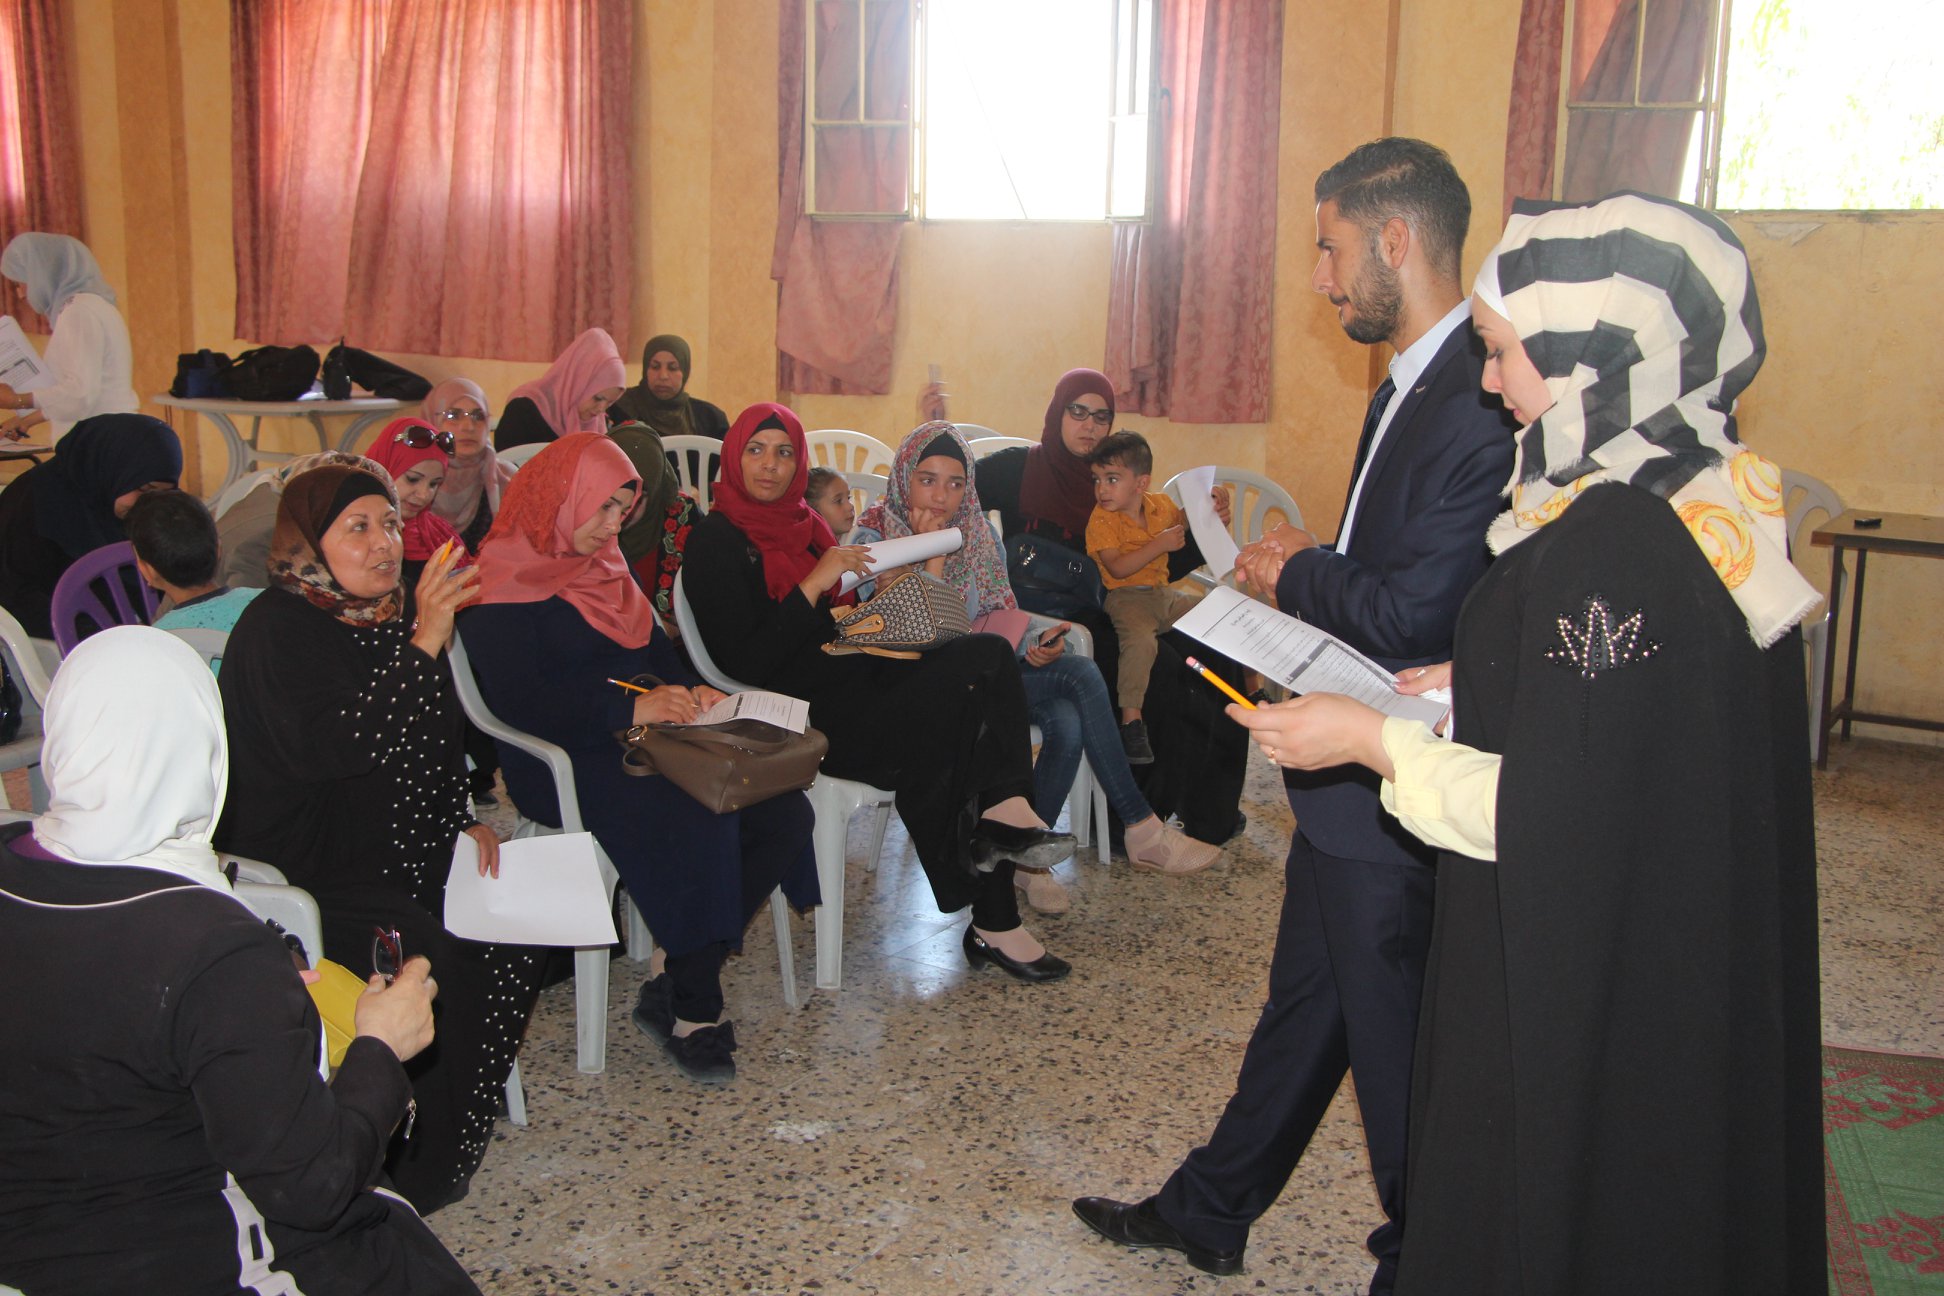  Roles for Social Change Association- ADWAR in partnership with Palestine Workers’ Union, Family Development Association, and Association d’Échanges Culturels Hébron France (AECHF)